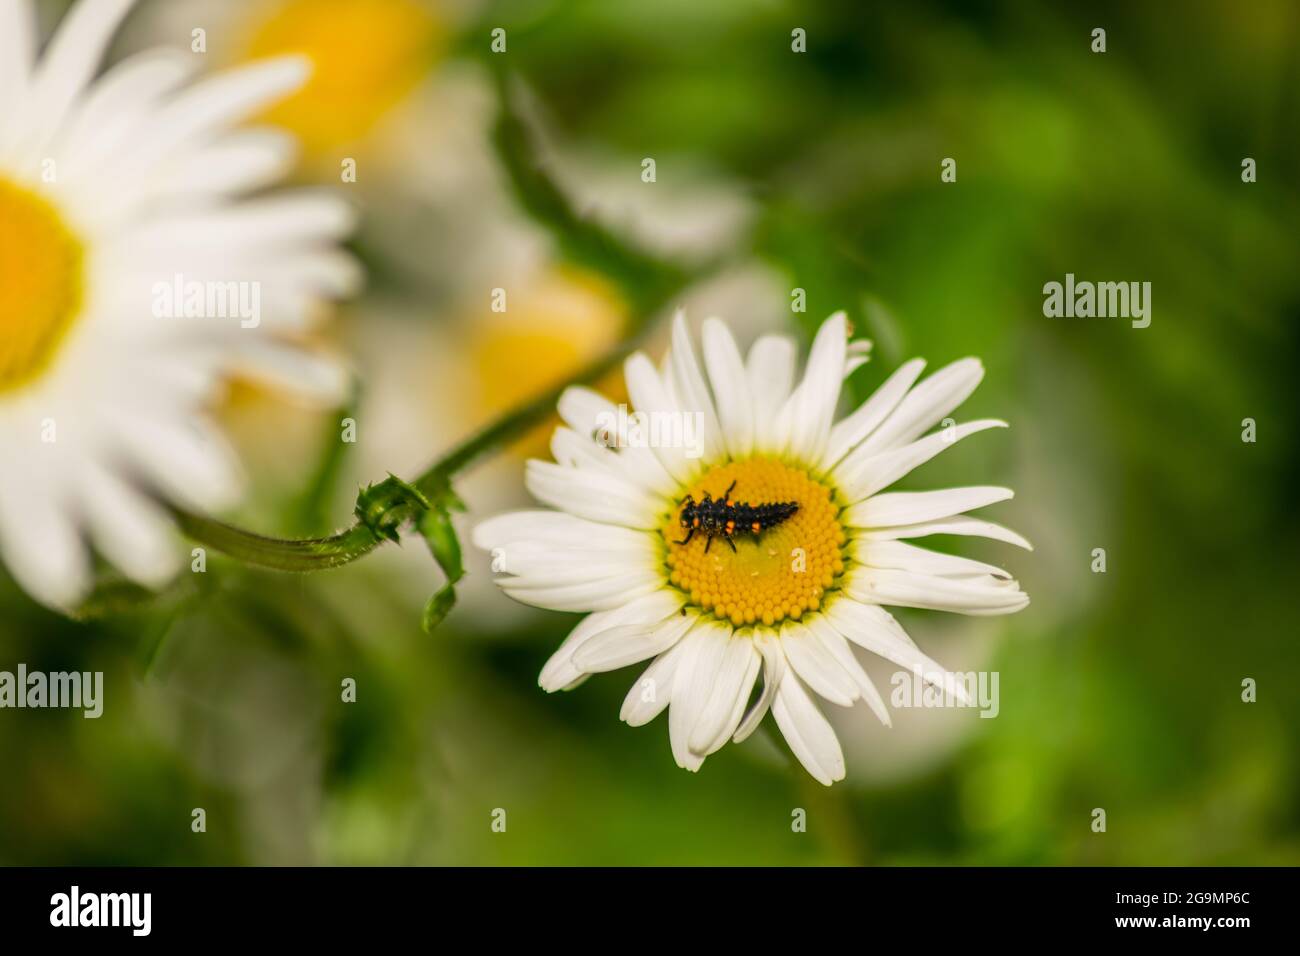 Ladybug larvae sitting in the centre of white and yellow flower, larva bug on chamomile blookming flower in the garden with blurry natural background Stock Photo